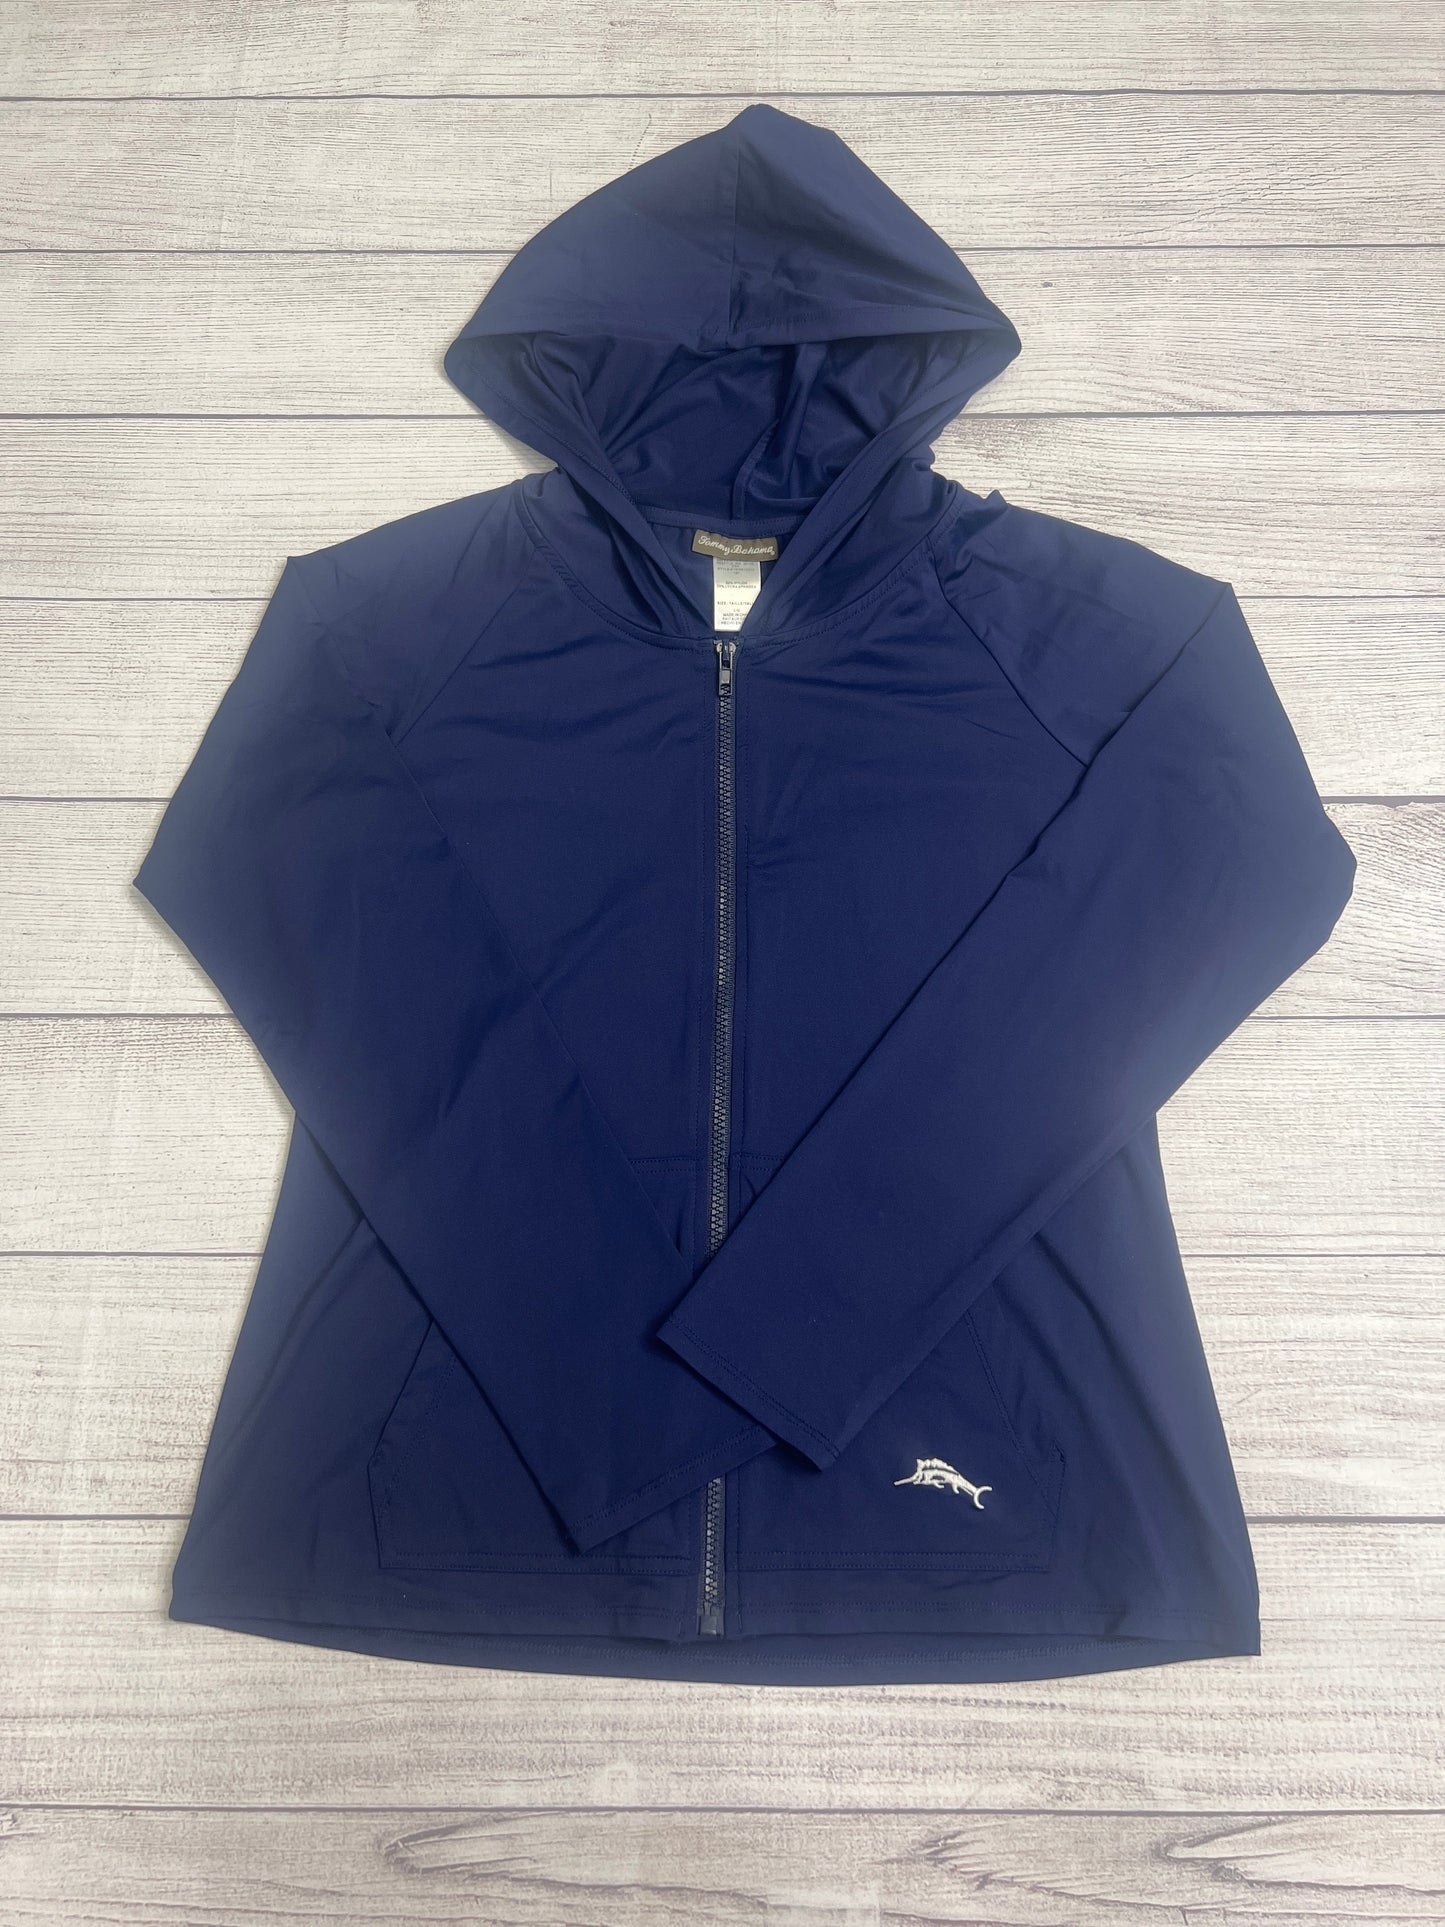 Athletic Jacket By Tommy Bahama  Size: L